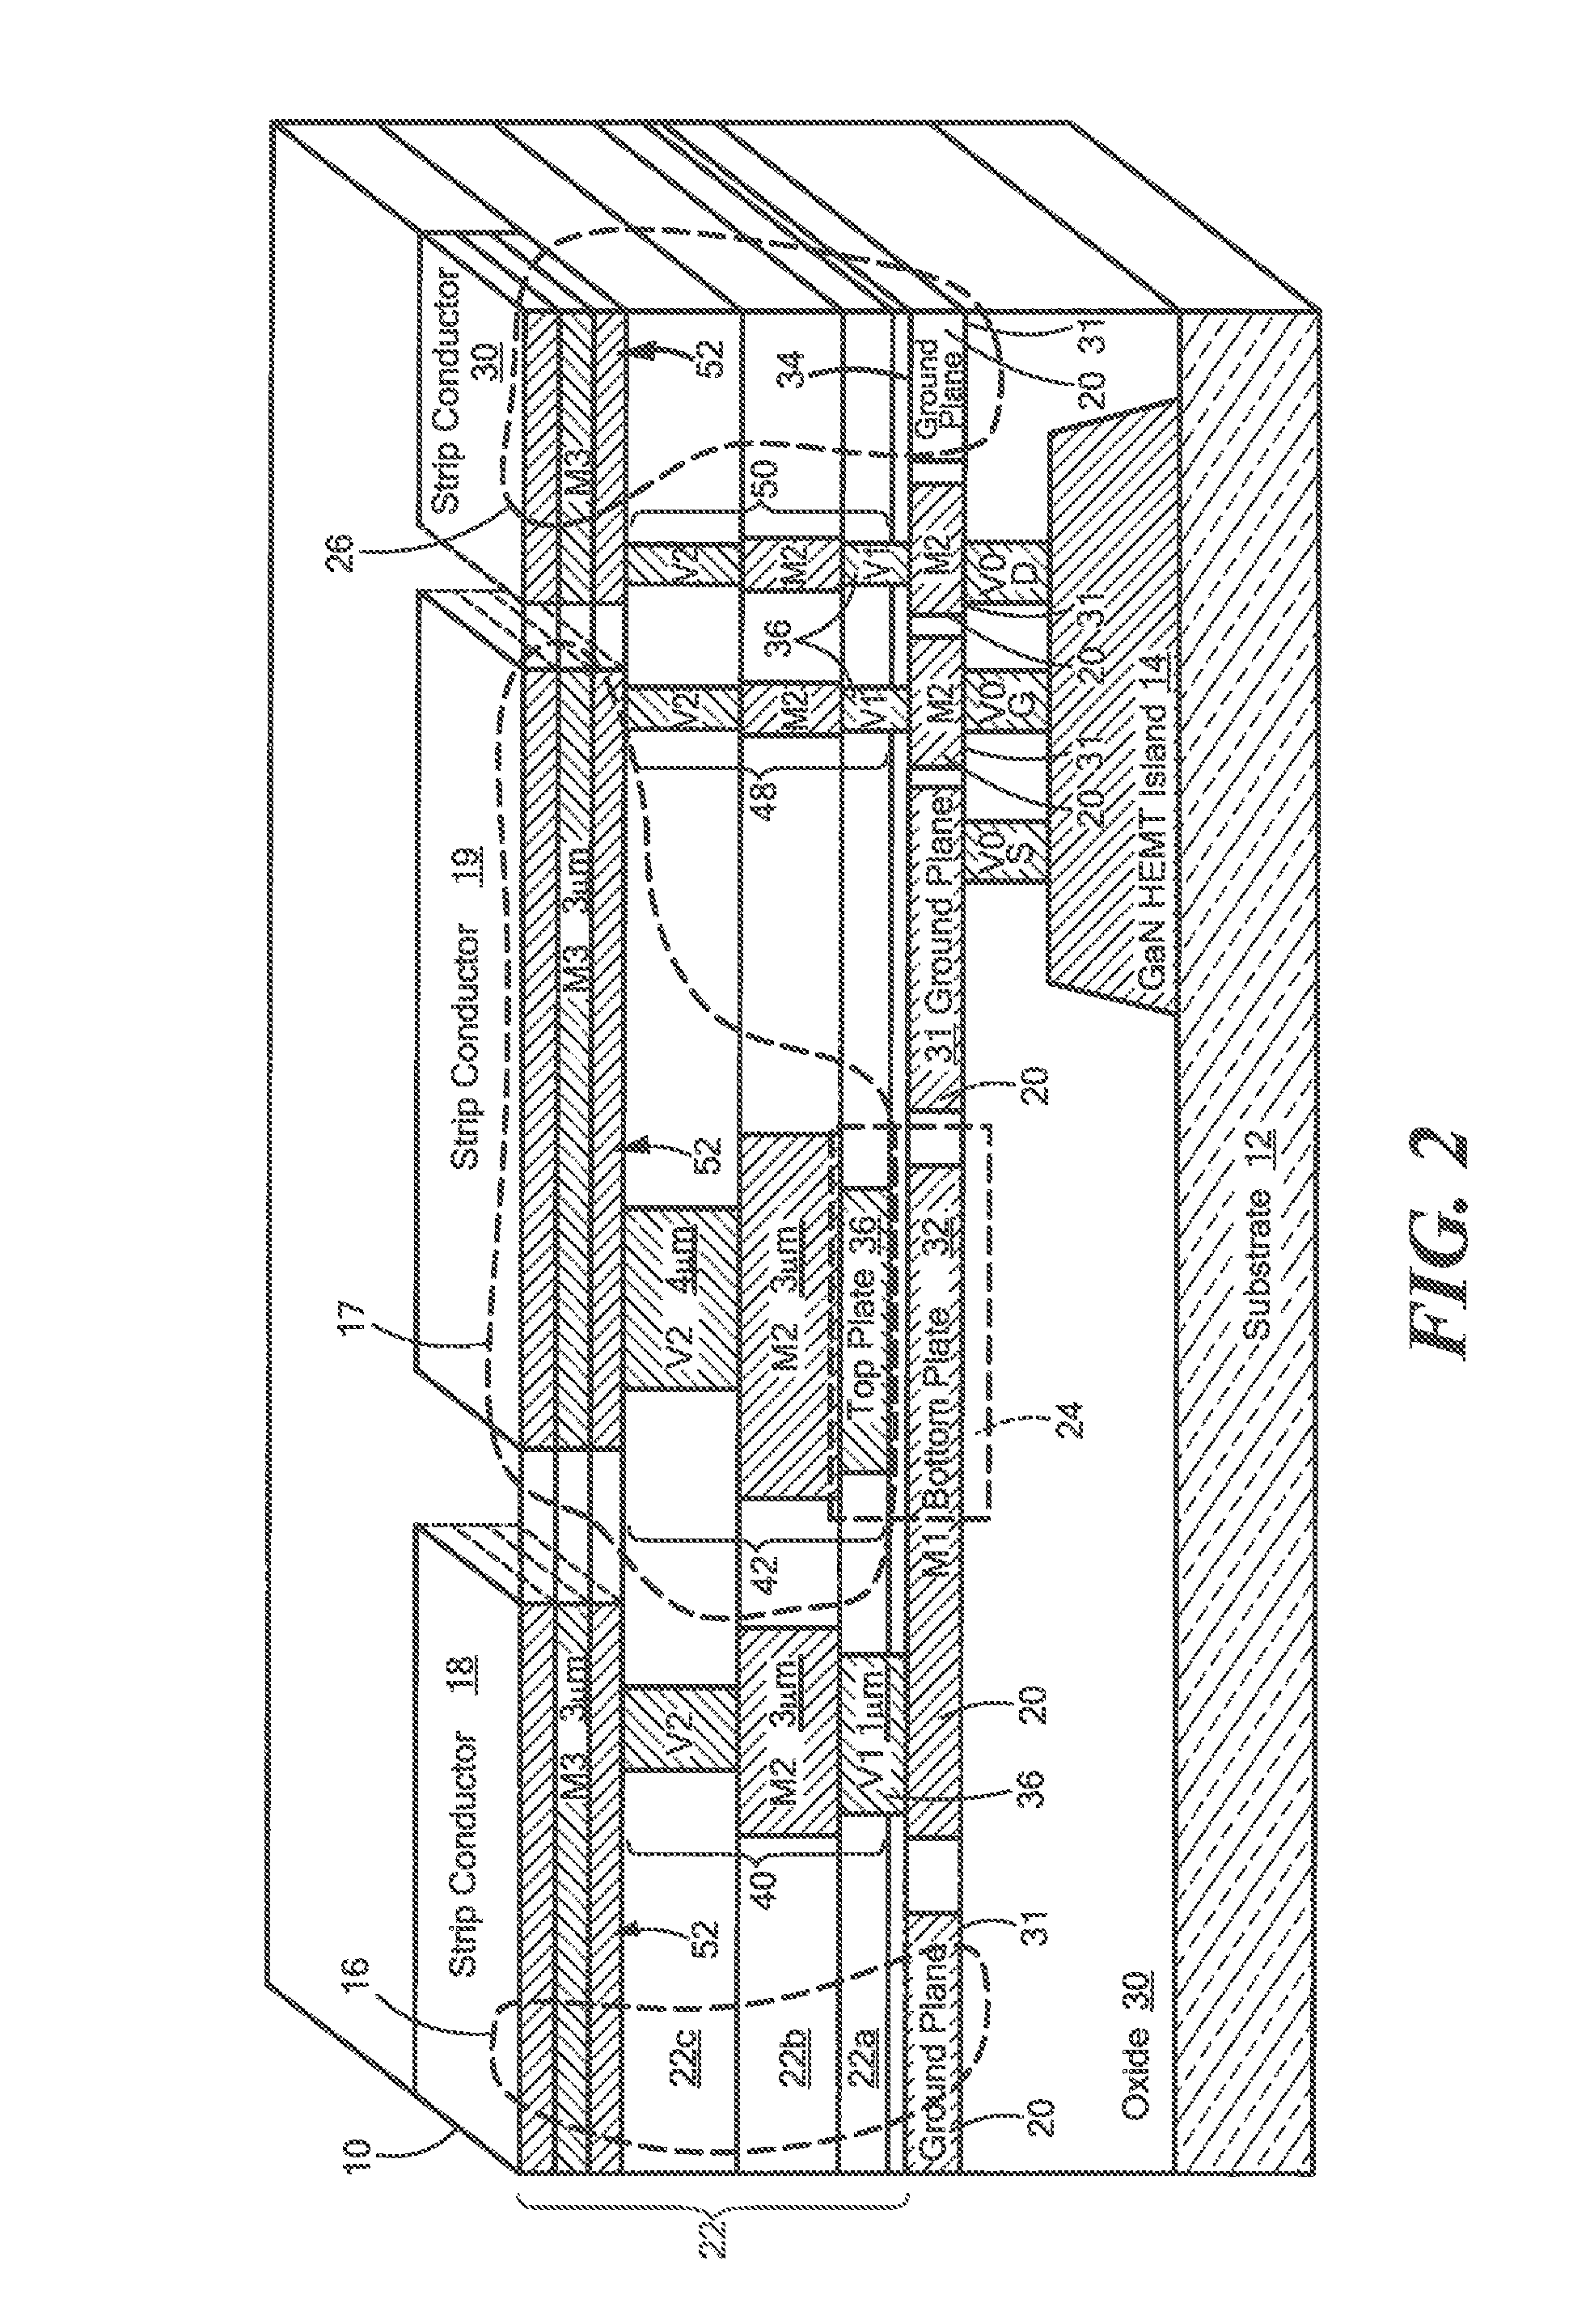 Microwave integrated circuit (MMIC) damascene electrical interconnect for microwave energy transmission